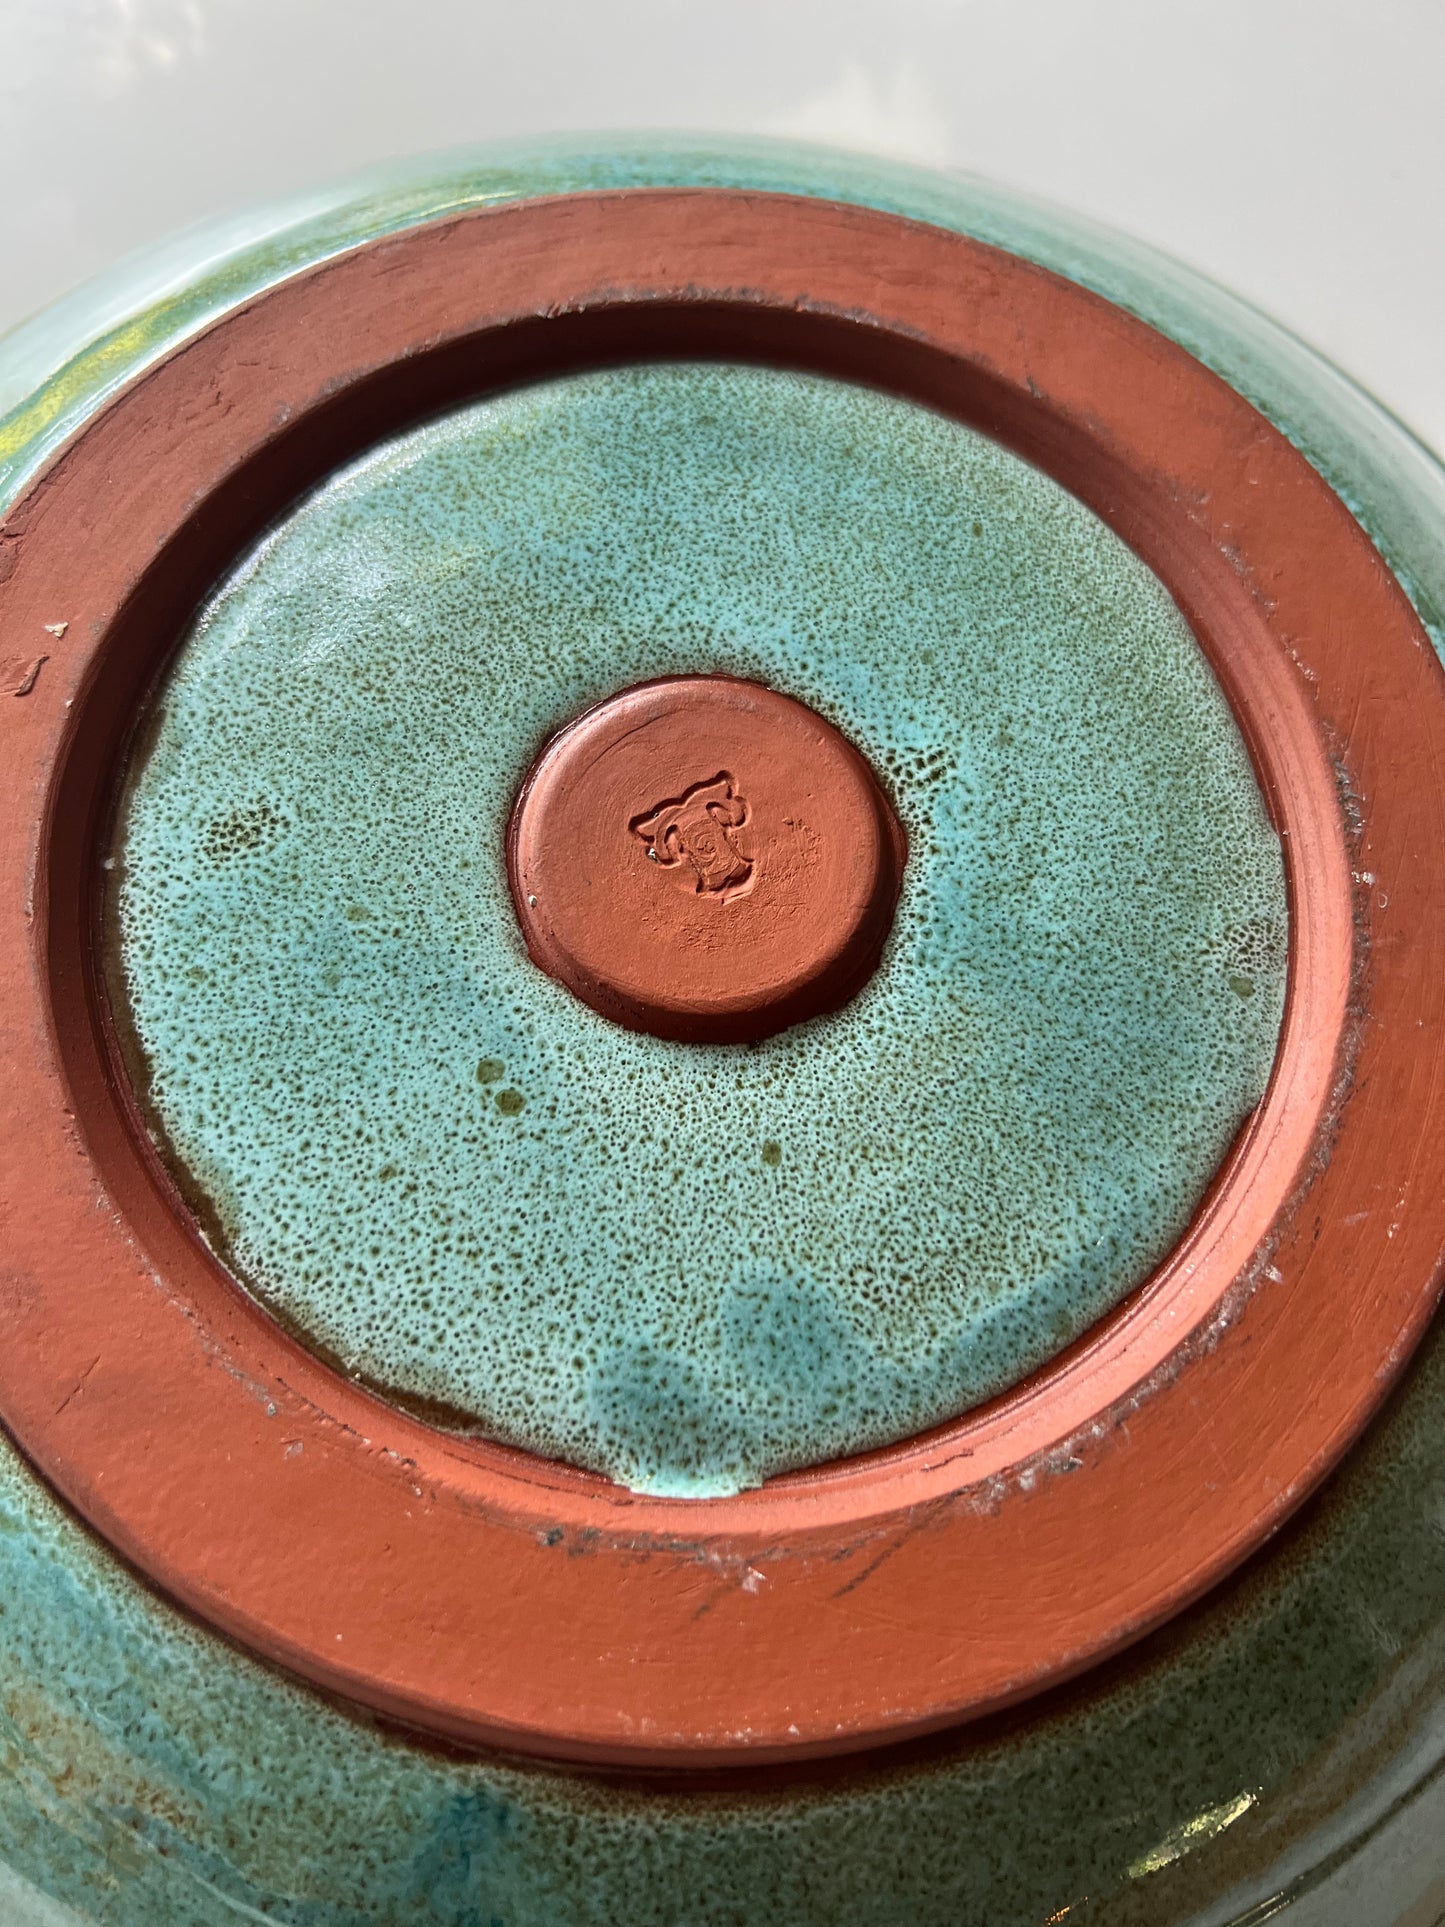 A Really Lovely Turquoise Bowl